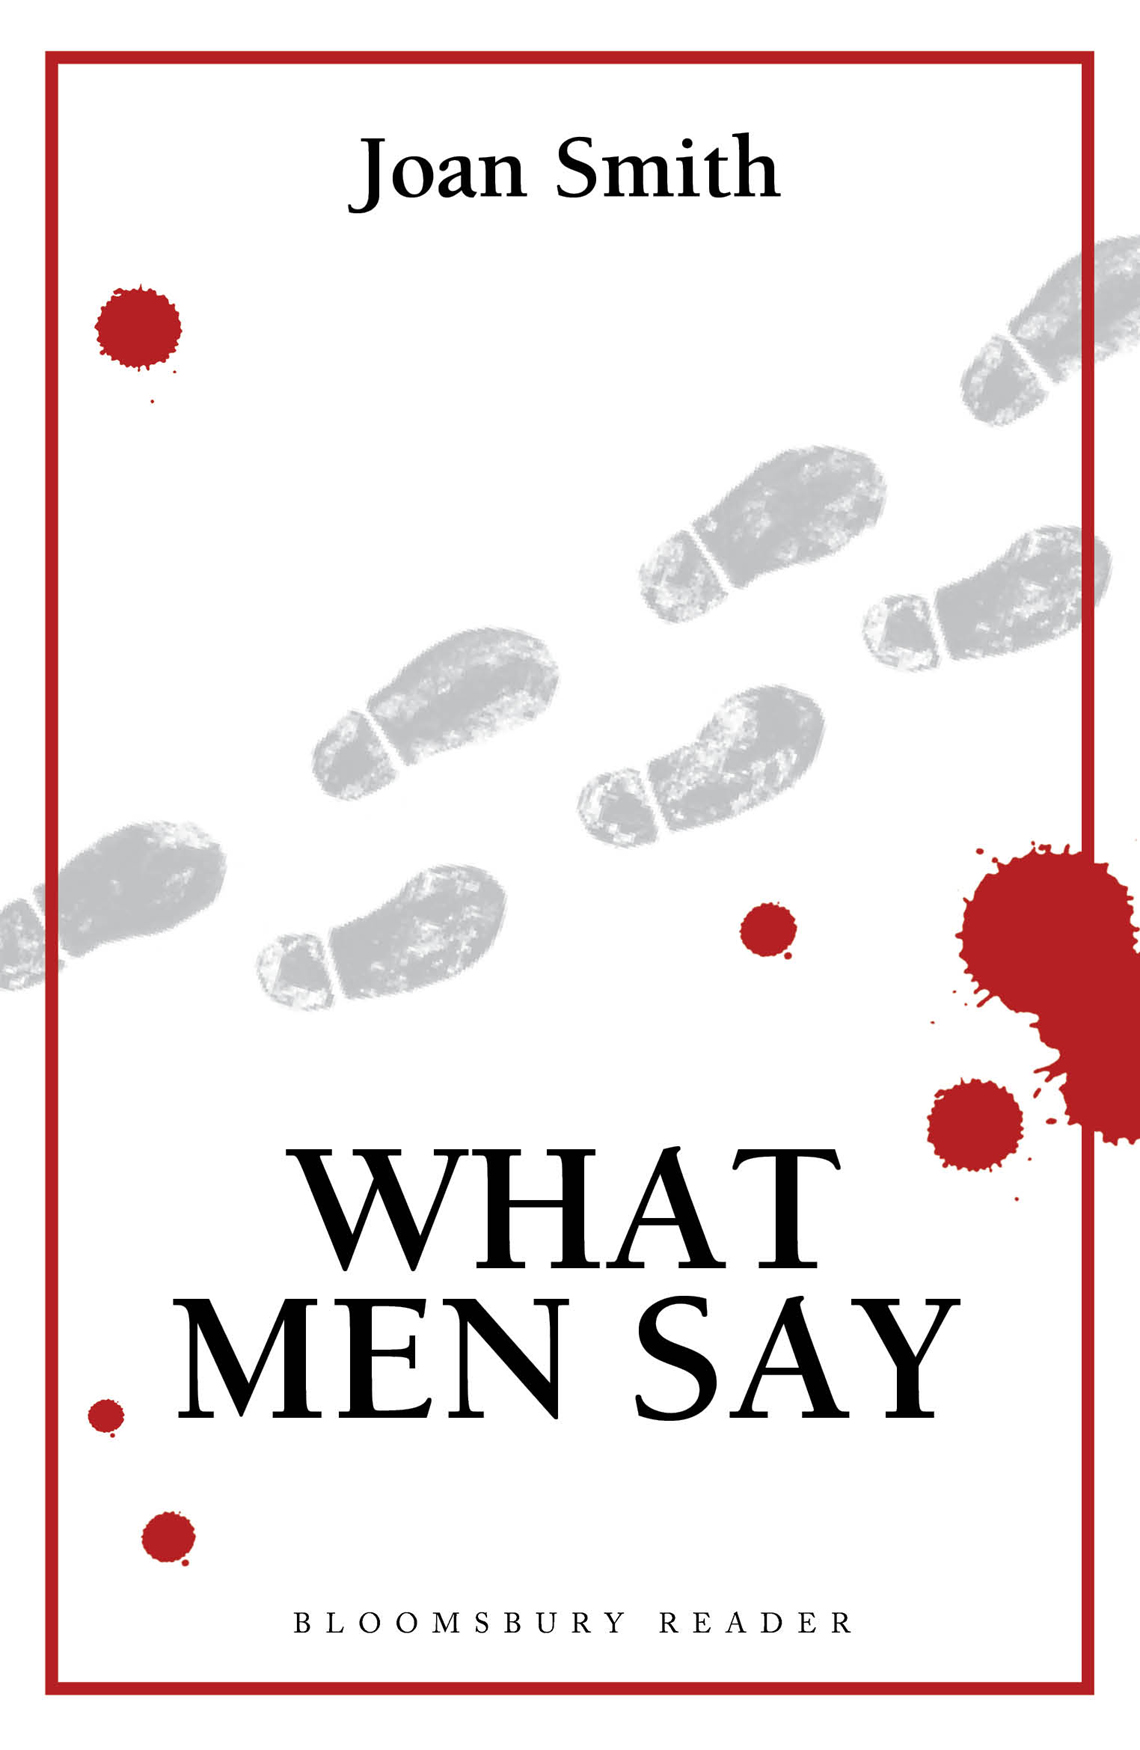 What Men Say (1993) by Joan Smith